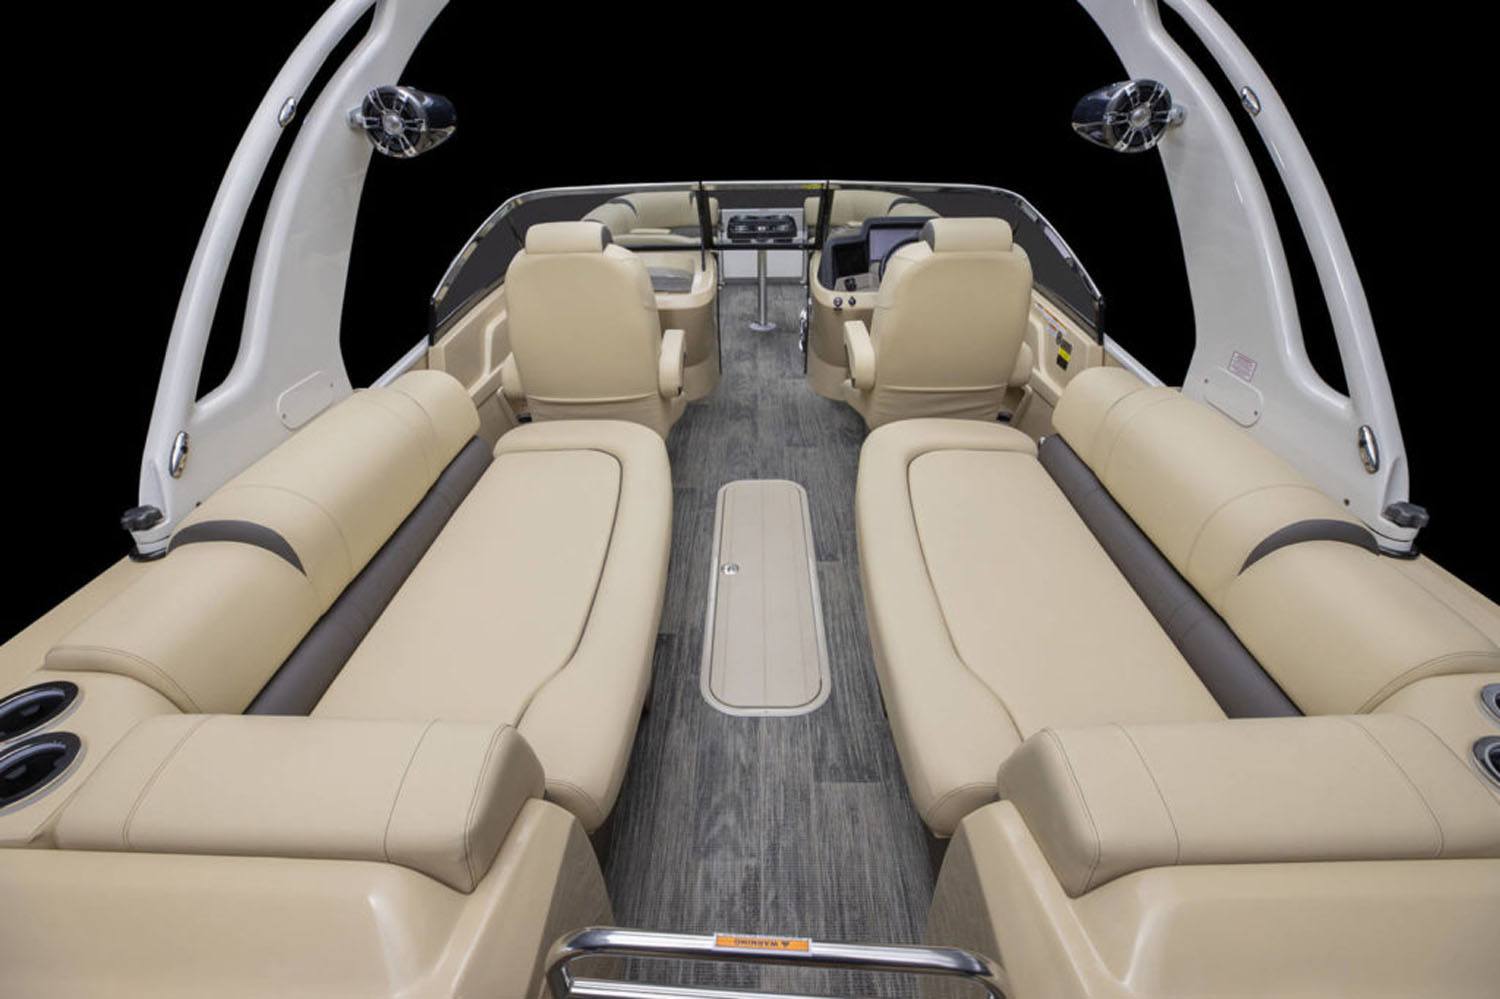 2022 Avalon Excalibur Quad Lounge Windshield - 25' in Memphis, Tennessee - Photo 5